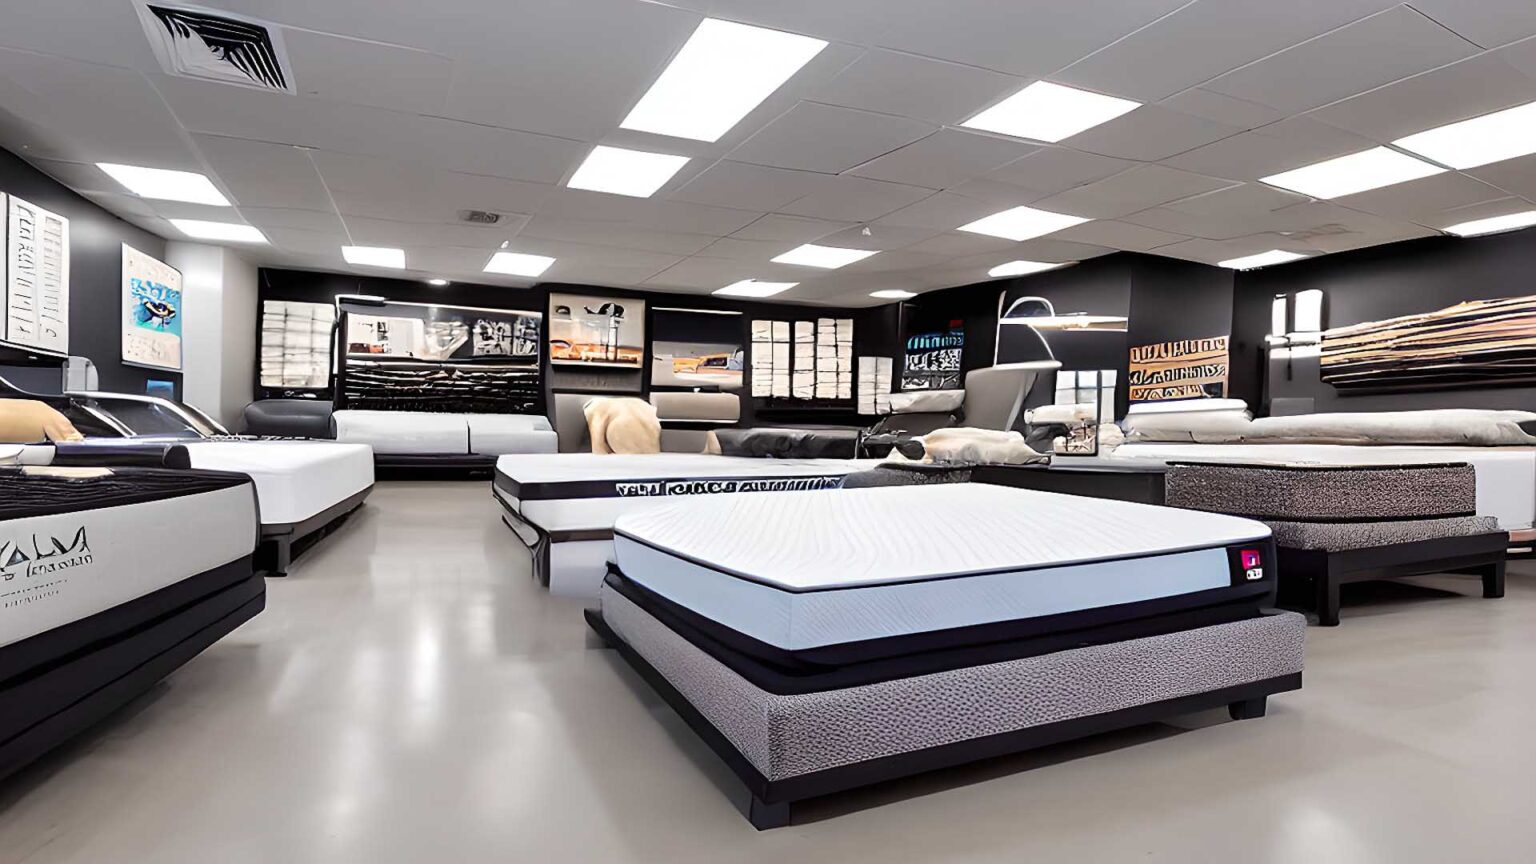 Mattress Stores, mattress dealers, and mattress retailers near me in Parsippany, NJ